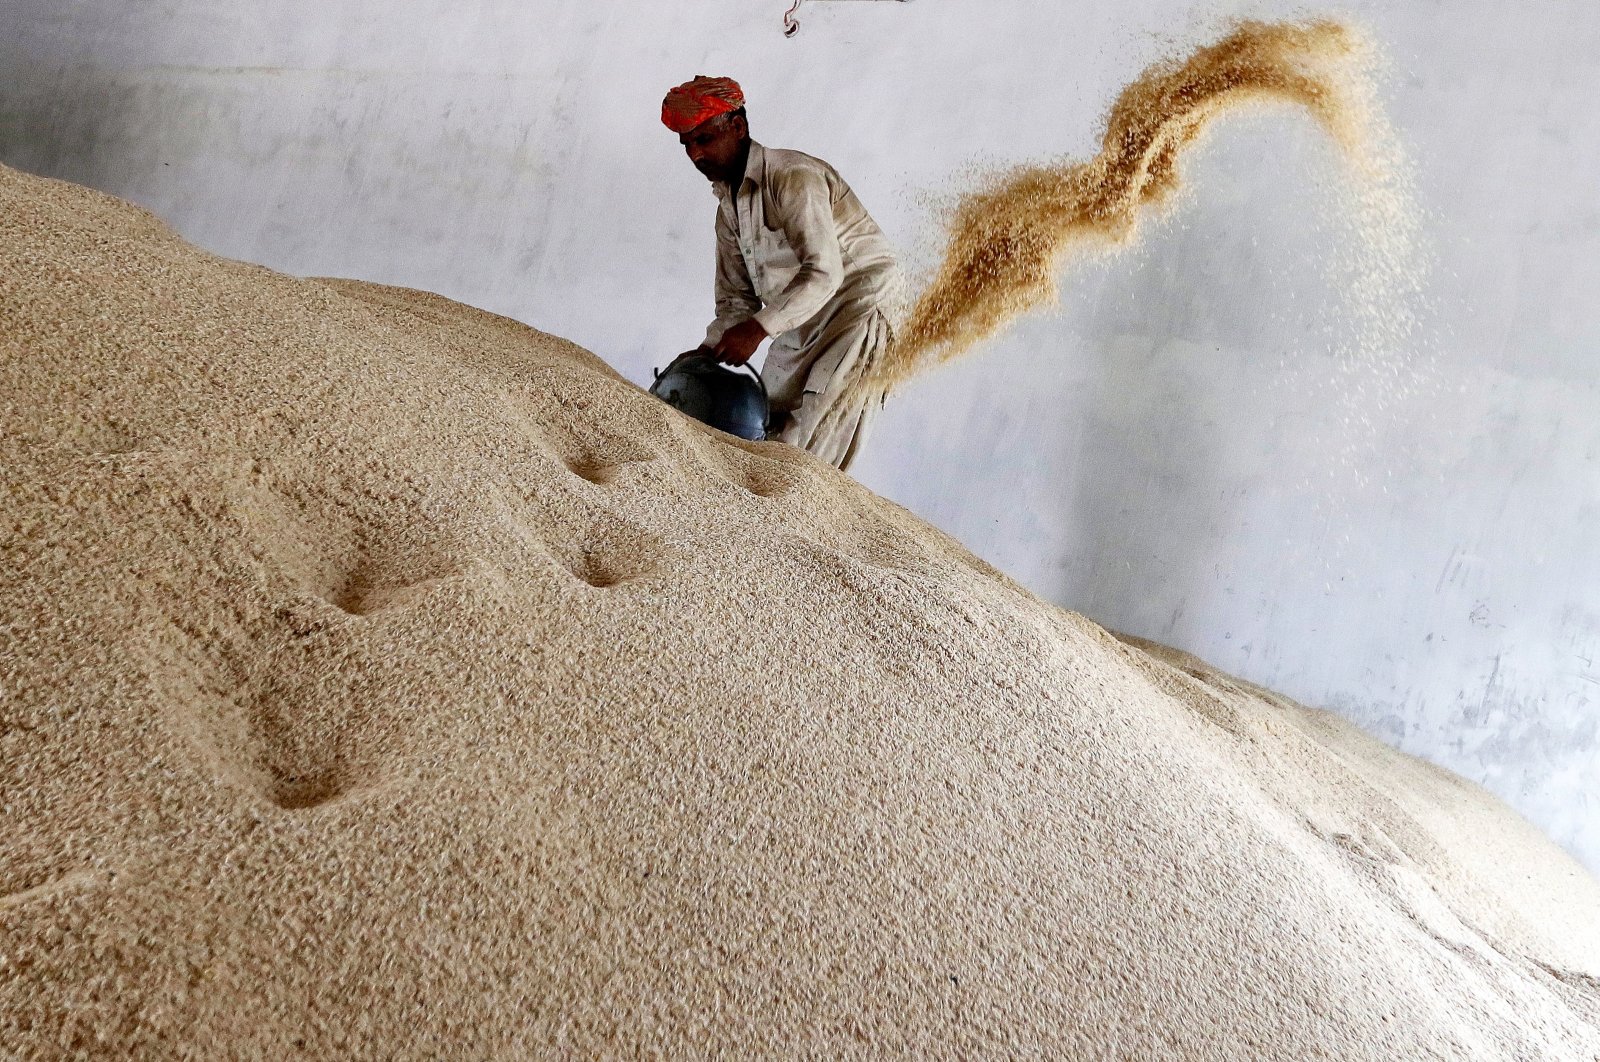 Global food prices retreat to 2-year low despite major rice surge